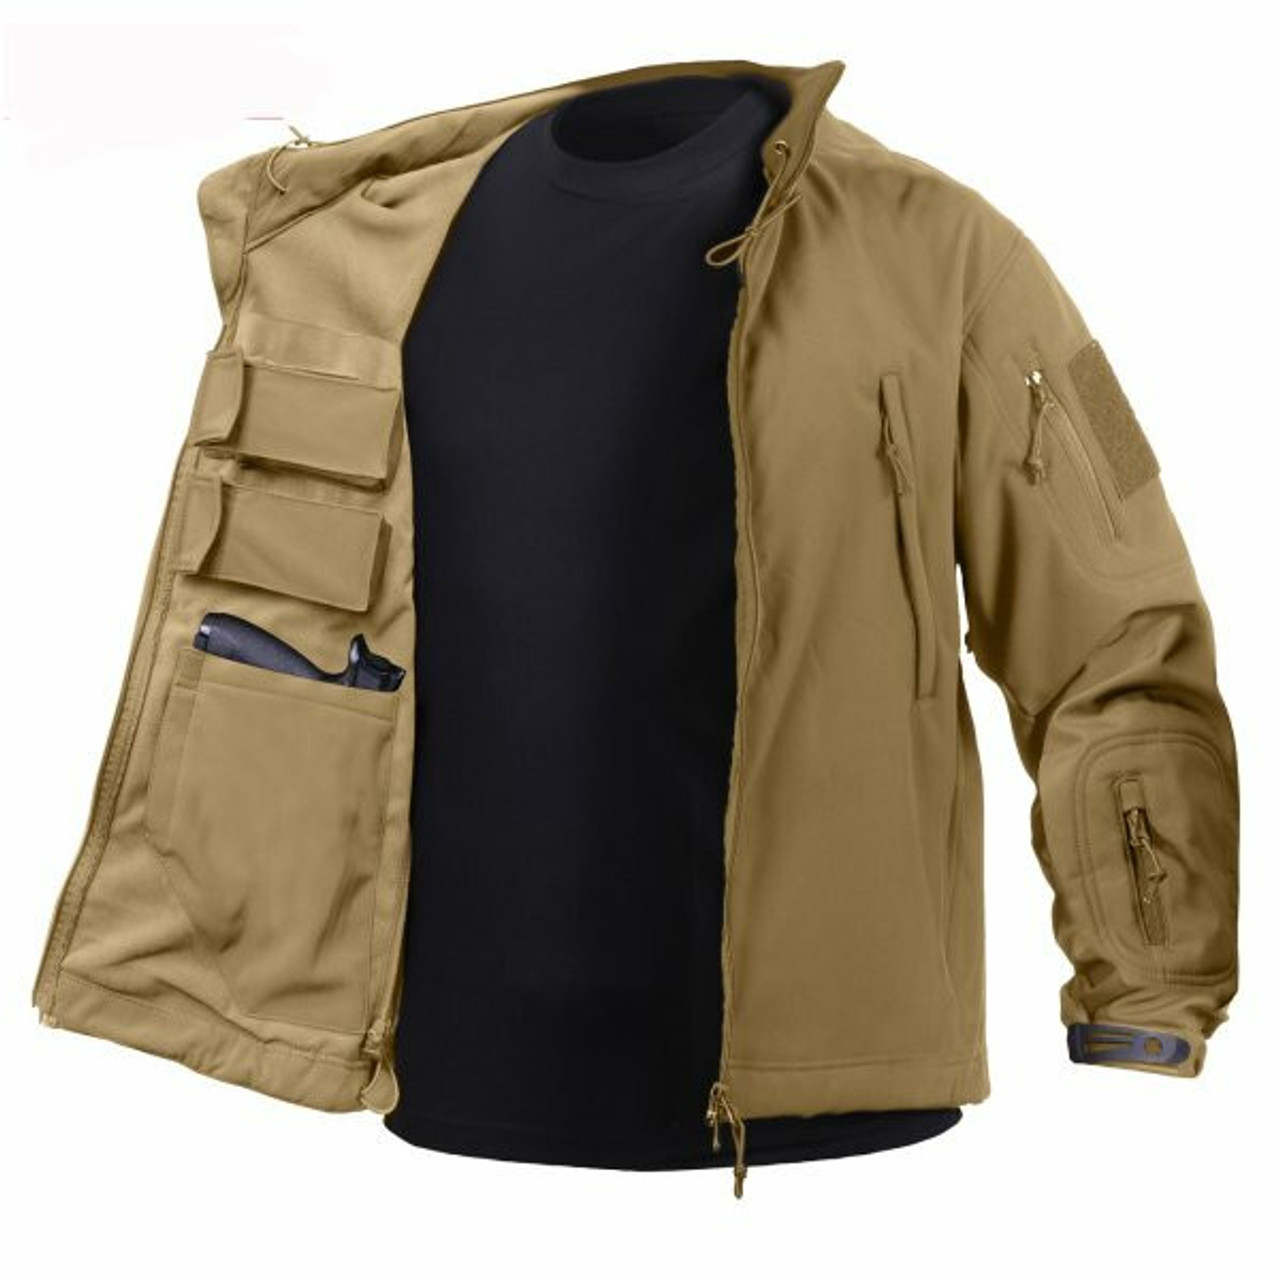 Rothco Concealed Carry Soft Shell Tactical Jacket